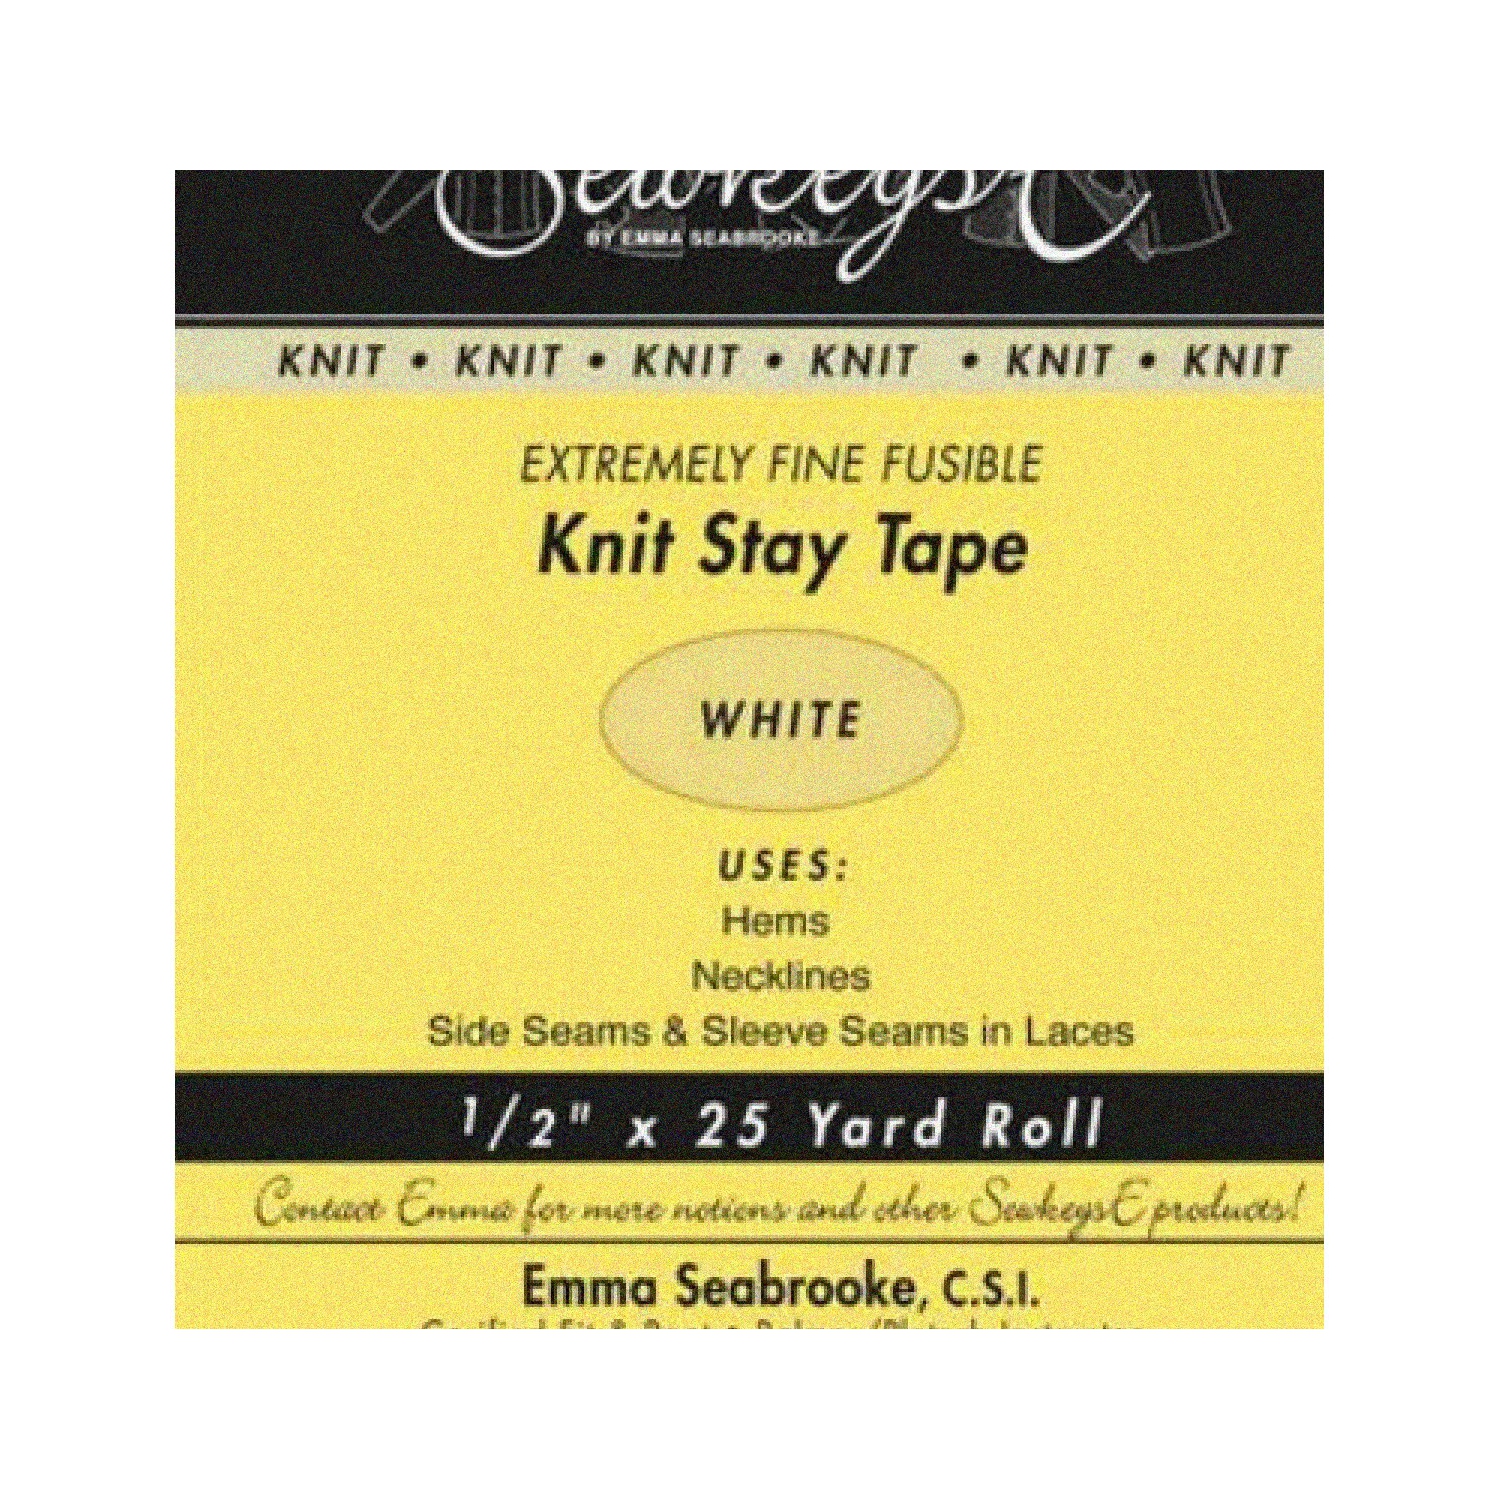 StayKnit 25 - Fine Fusible Interfacing Tape for Knits - 0.5" x 25 Yards - SewkeysE KST-01 - Sold in 25 Yard Rolls - M494.09 Compatible.